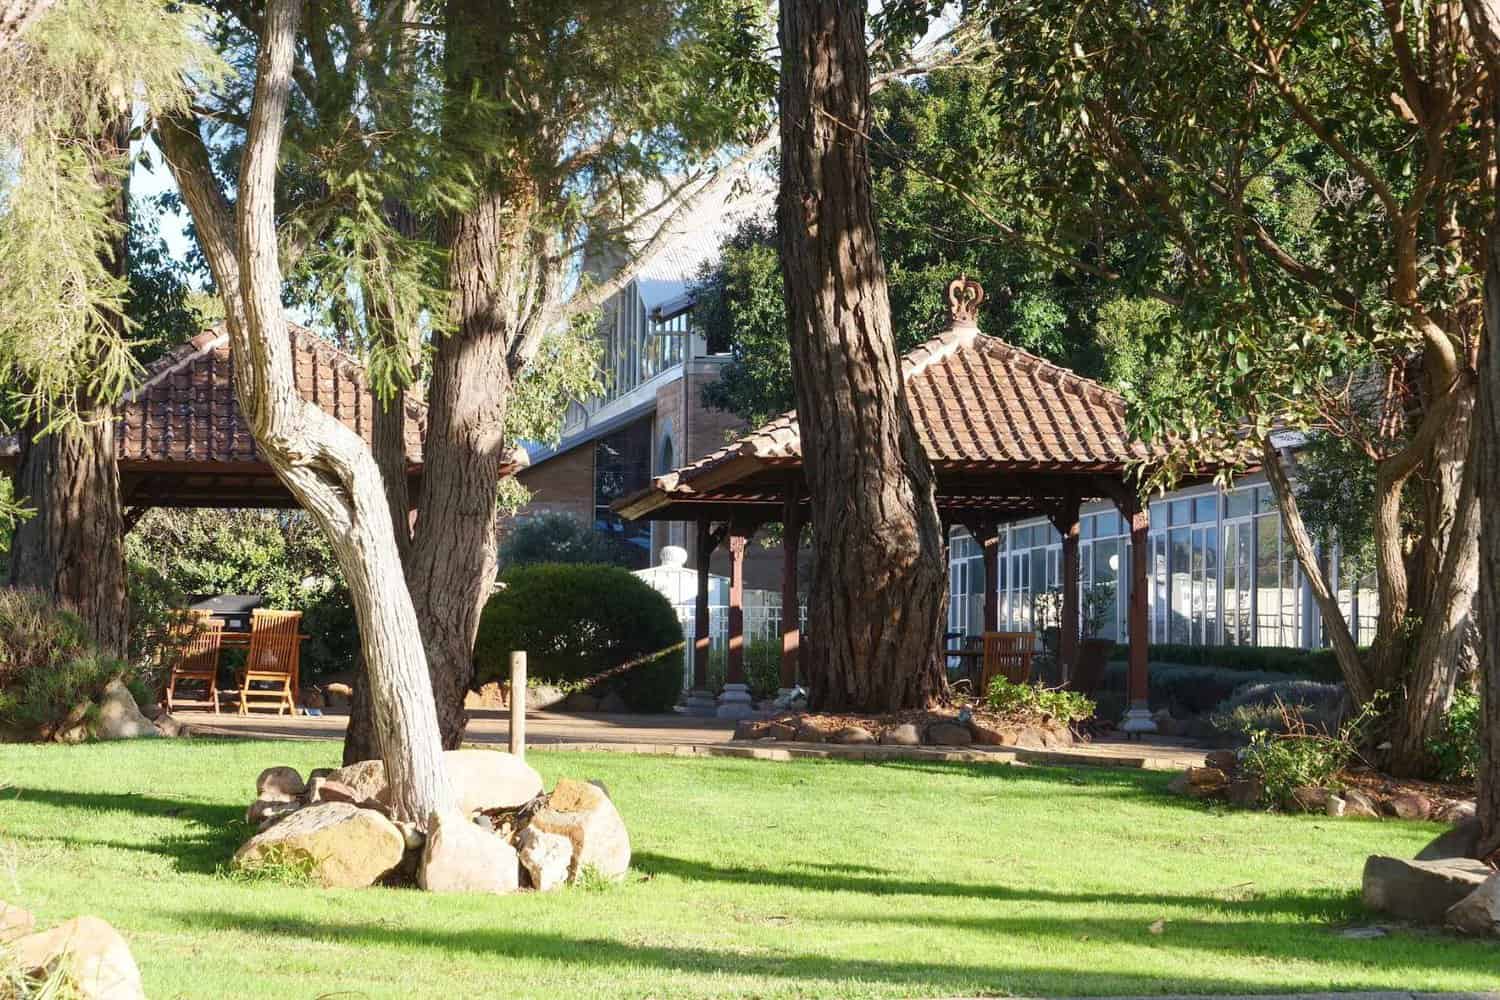 Picturesque garden area of a Margaret River accommodation with lush greenery, mature trees, and a charming gazebo.